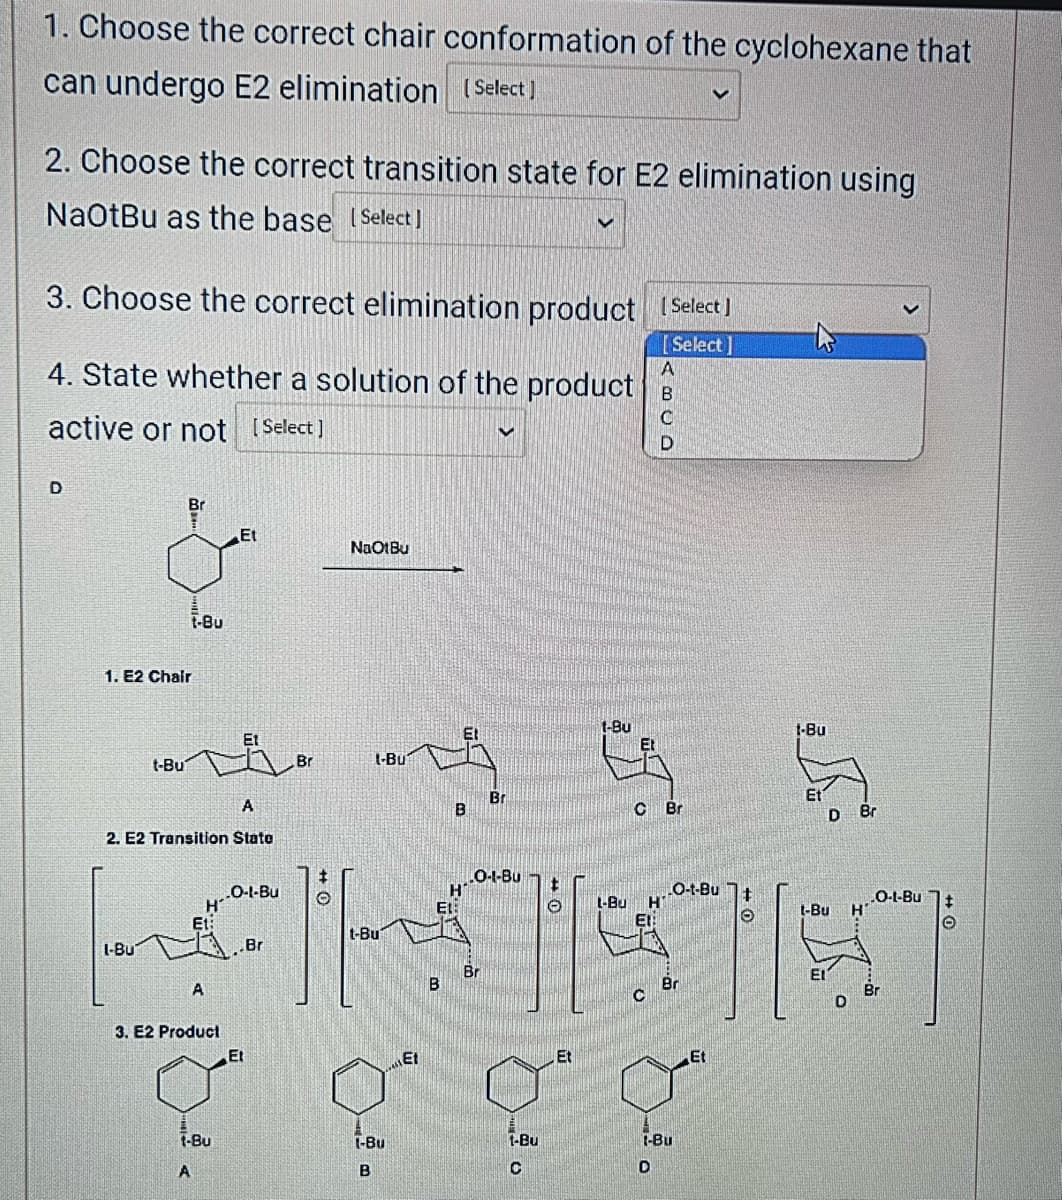 1. Choose the correct chair conformation of the cyclohexane that
can undergo E2 elimination (Select]
2. Choose the correct transition state for E2 elimination using
NaOtBu as the base [Select]
3. Choose the correct elimination product [Select]
[Select]
A
4. State whether a solution of the product B
active or not [Select]
C
D
Br
1. E2 Chair
t-Bu
1-Bu
t-Bu
A
2. E2 Transition State
H
A
3. E2 Product
Et
t-Bu
A
O-1-Bu
.Br
Et
Br
+
O
NaOtBu
l-Bu
t-Bu
T
1-Bu
B
B
Et
Br
0-1-Bu
t
$][
Br
B
V
1-Bu
C
Et
1-Bu
CAS
C Br
L-Bu
D
H--O-t-Bu
C Br
-Bu
D
Et
O
1-Bu
D
Et
1-Bu H
Br
D
O-L-Bu
Br